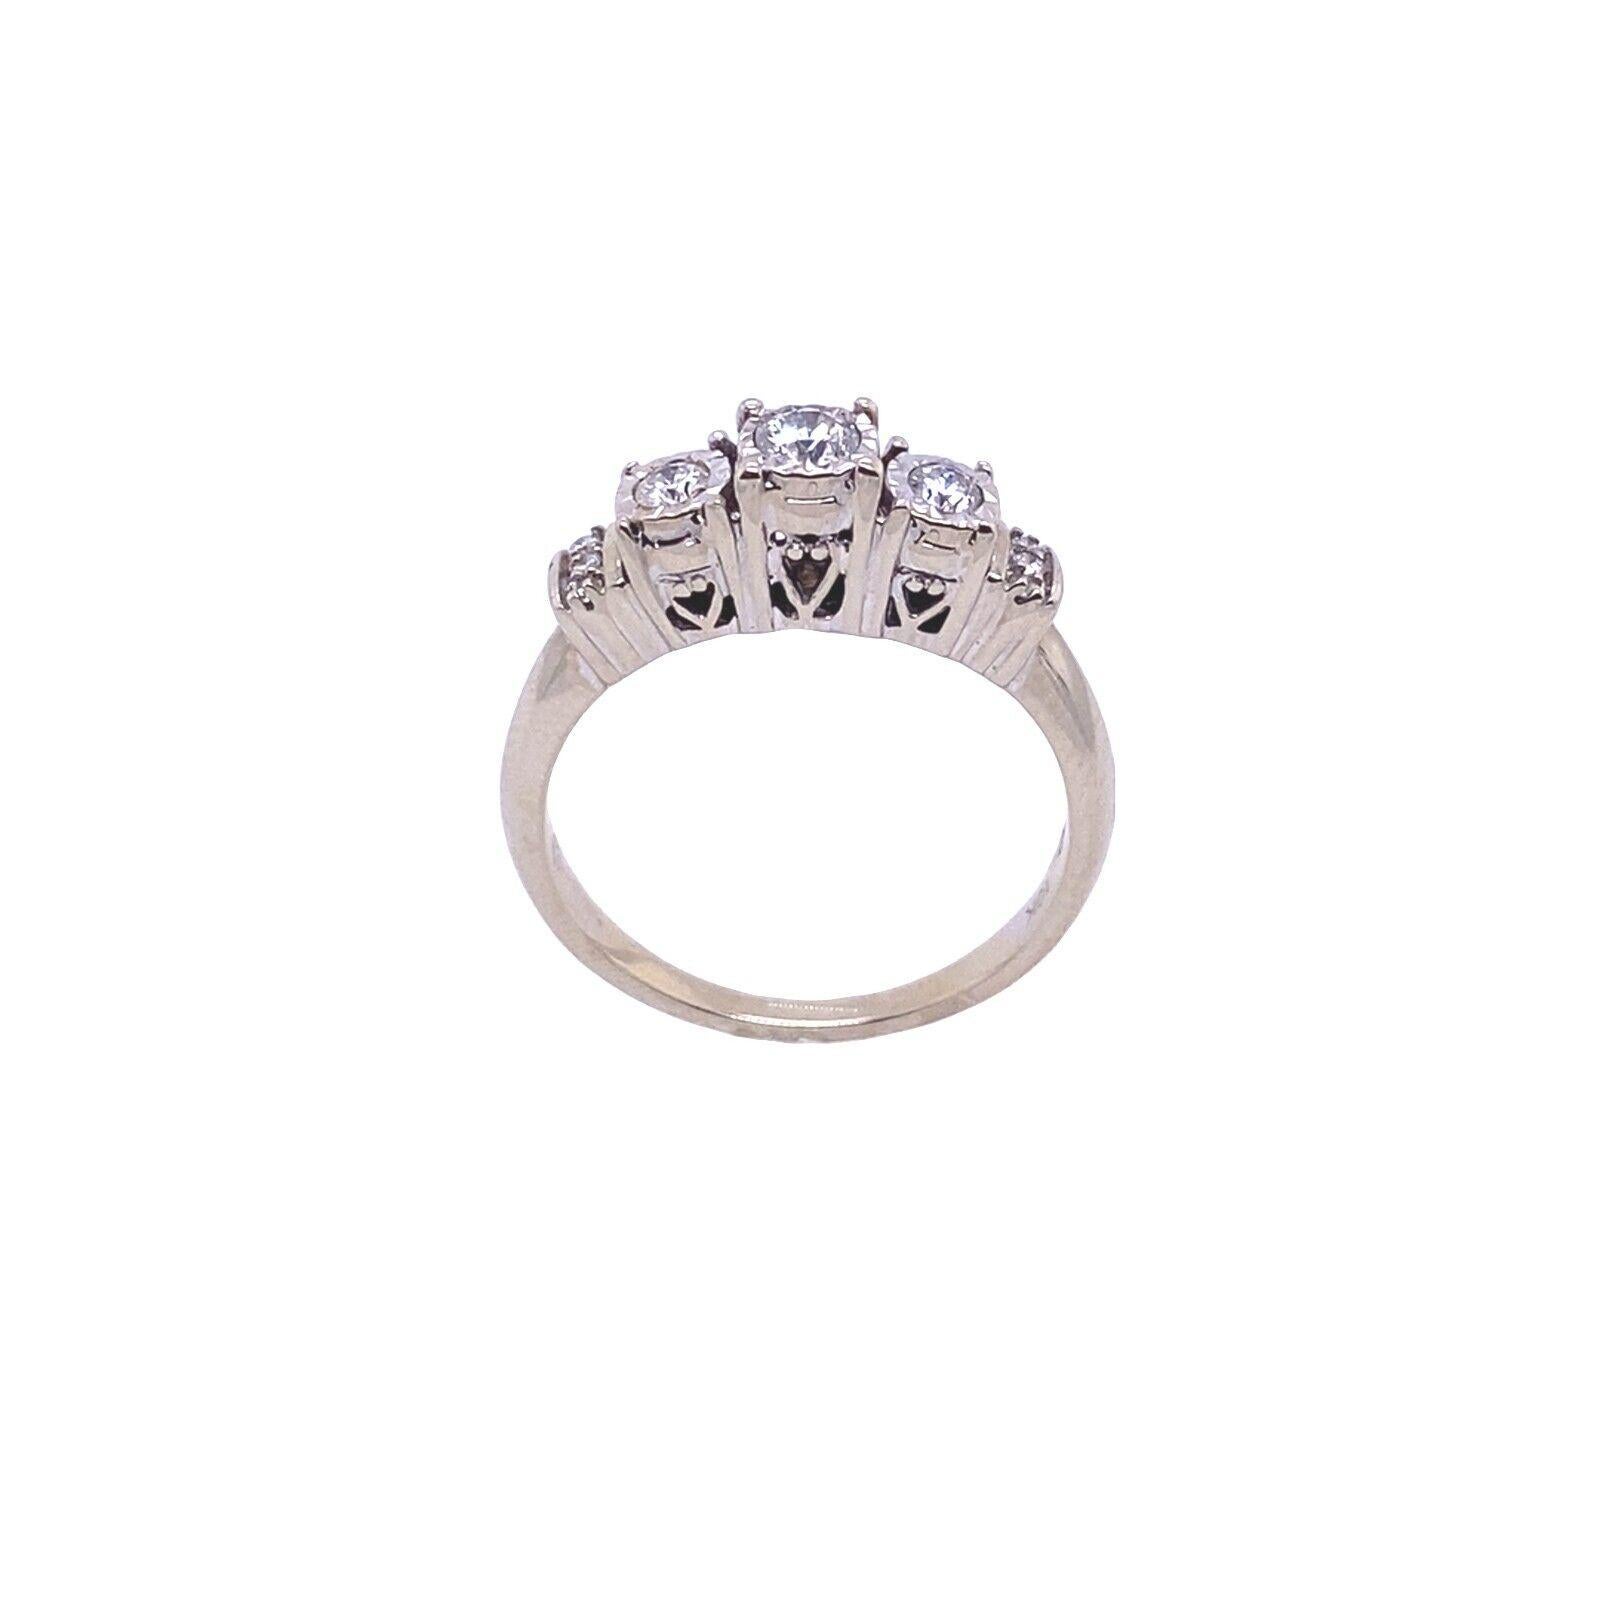 Illusion Set 3 Stone Diamond Ring Set With 0.25ct Of Round Diamonds In 10ct Gold

This illusion set 3 stone diamond ring is set with 0.25ct of Round Brilliant Cut Diamonds in a 10ct White Gold setting

Additional Information: 
Total Diamond Weight: